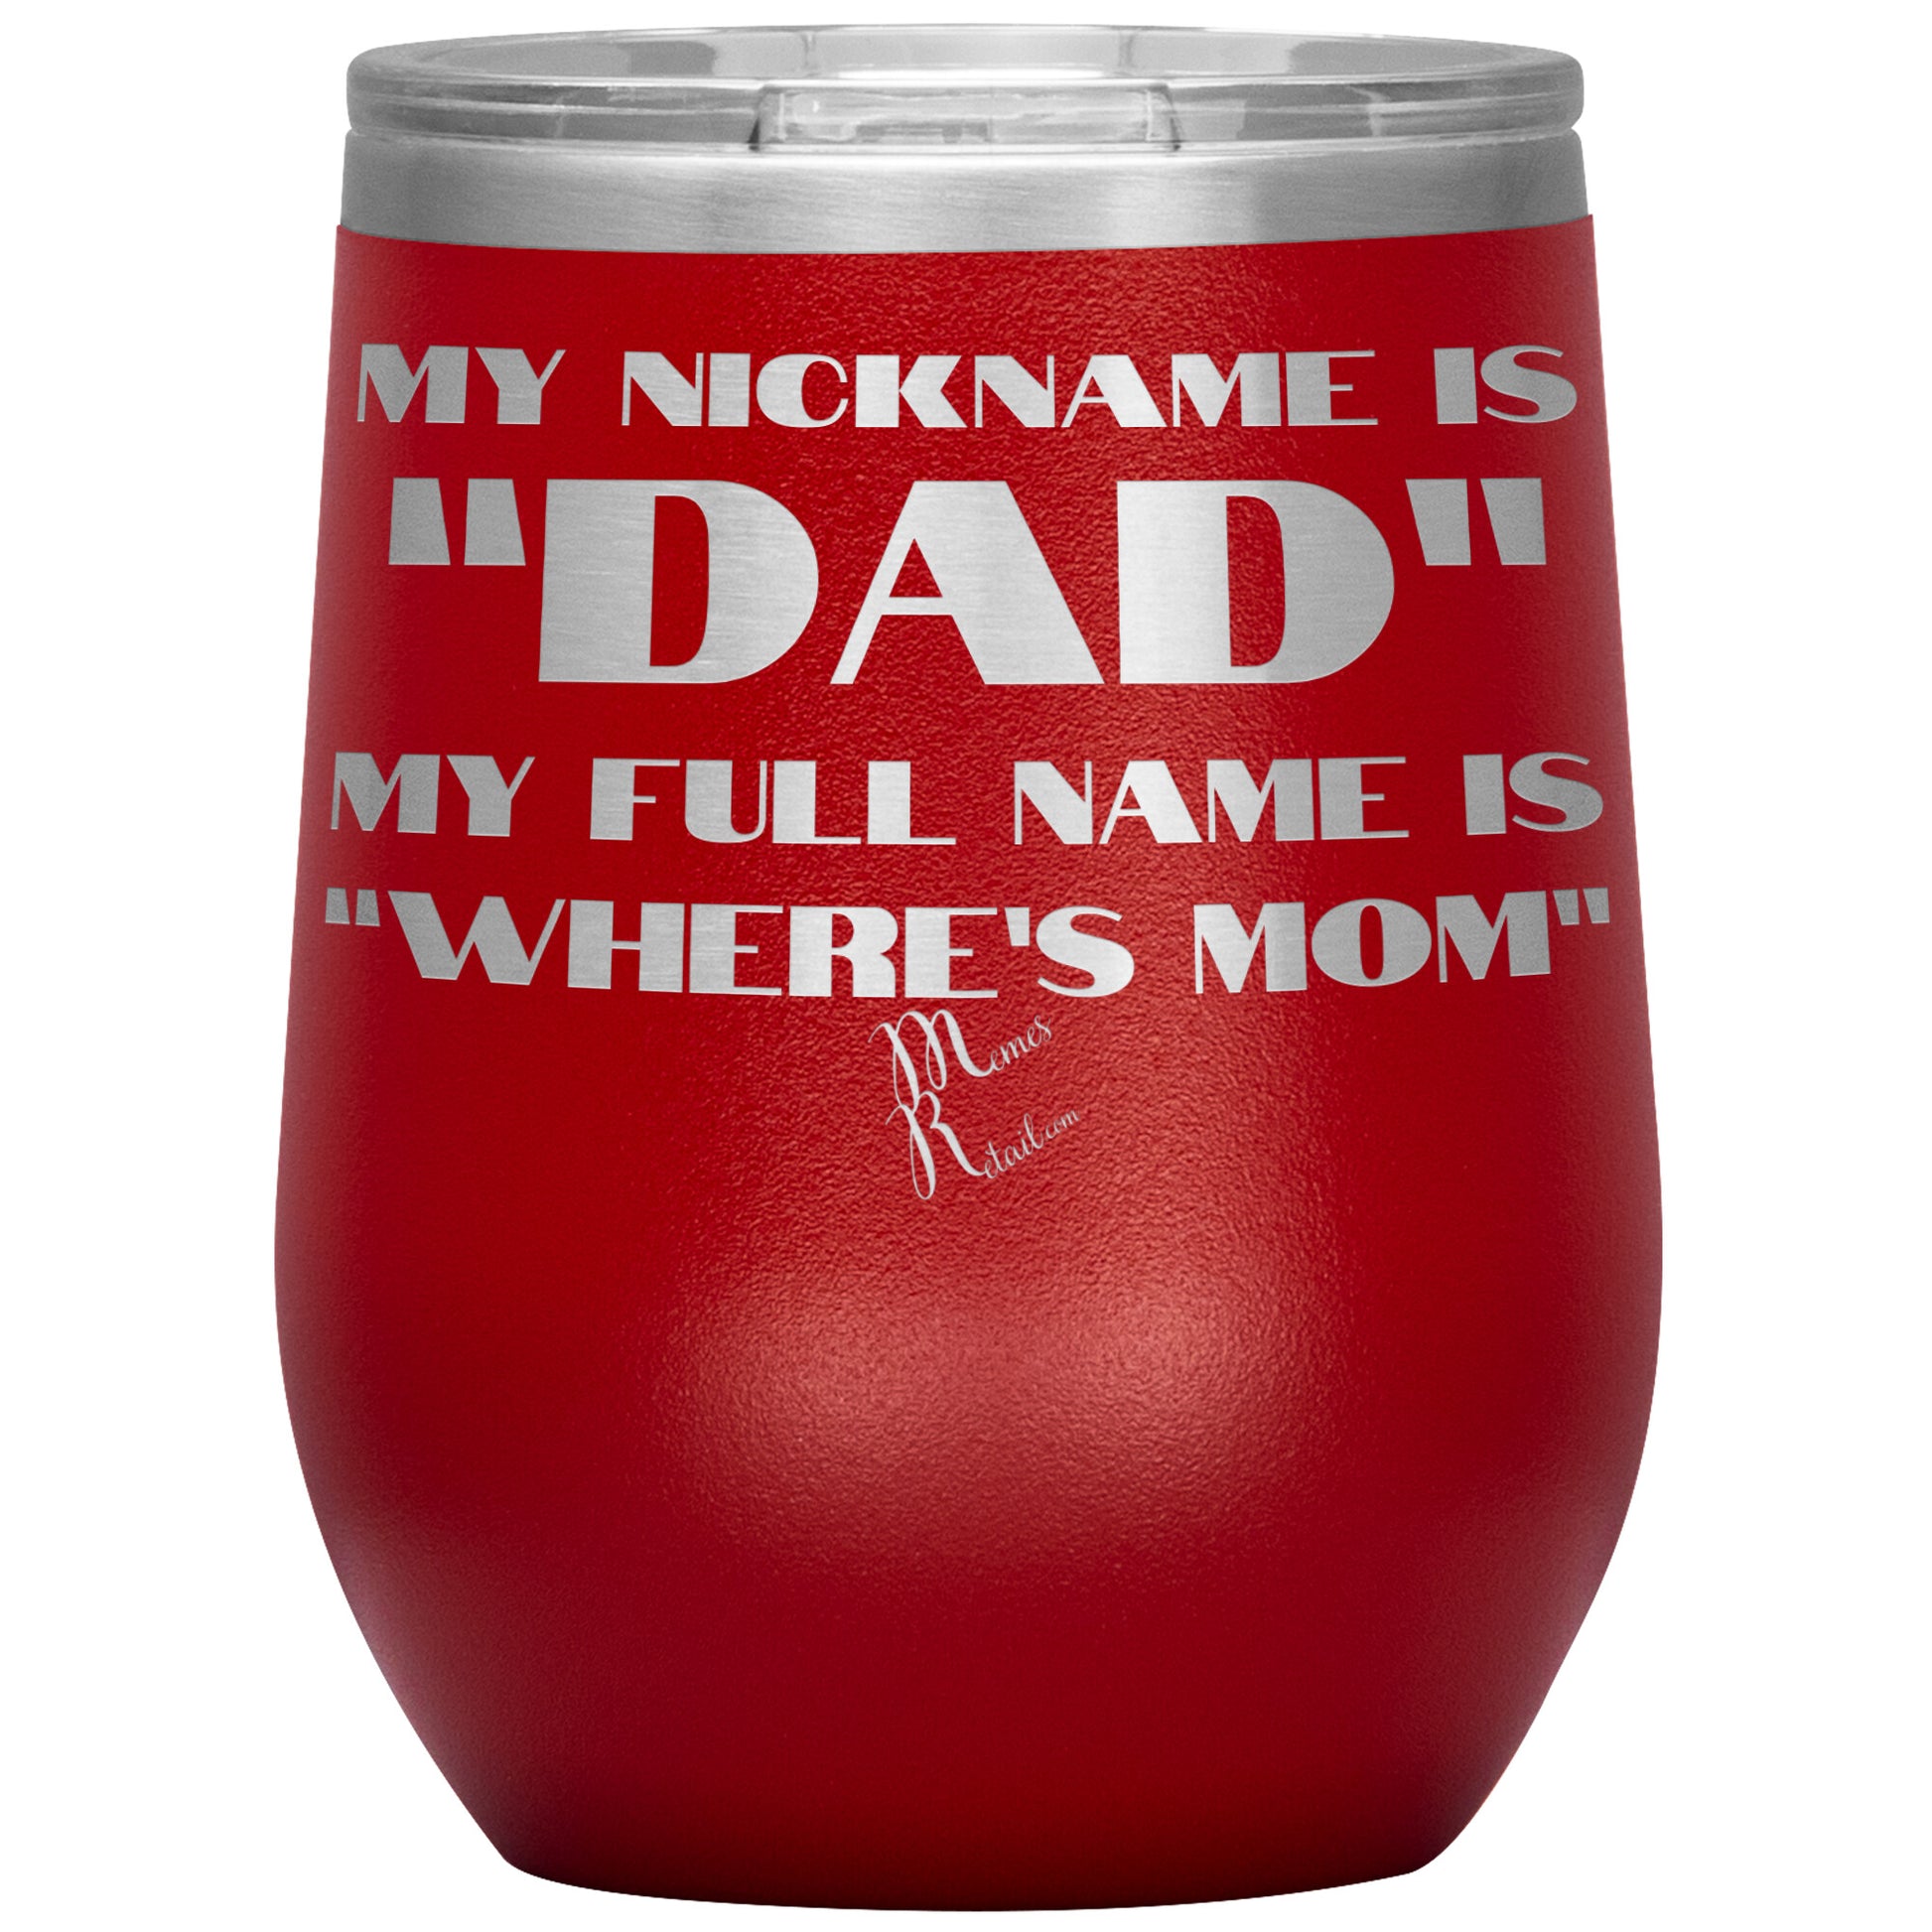 My Nickname is "Dad", My Full Name is "Where's Mom" Tumblers, 12oz Wine Insulated Tumbler / Red - MemesRetail.com